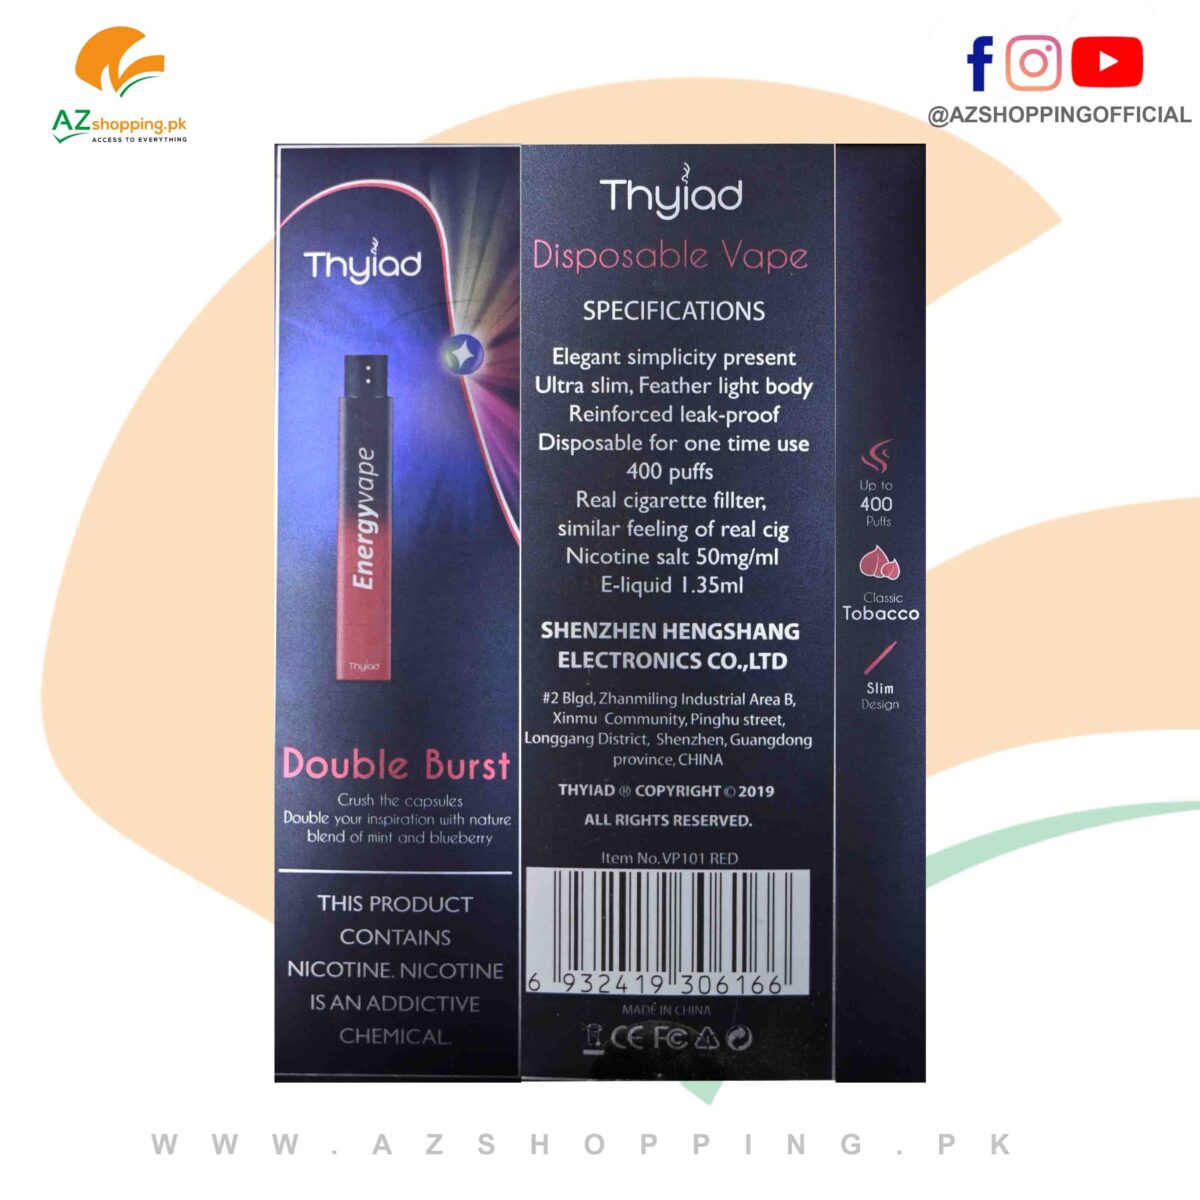 Thyiad – Disposable Ultra Slim Vape with 400 Puffs, Real Cigarette Filter, Nicotine Salt 50mg/ml E-liquid 1.35ml – Classic Tobacco Flavor – Item No. VP101 RED